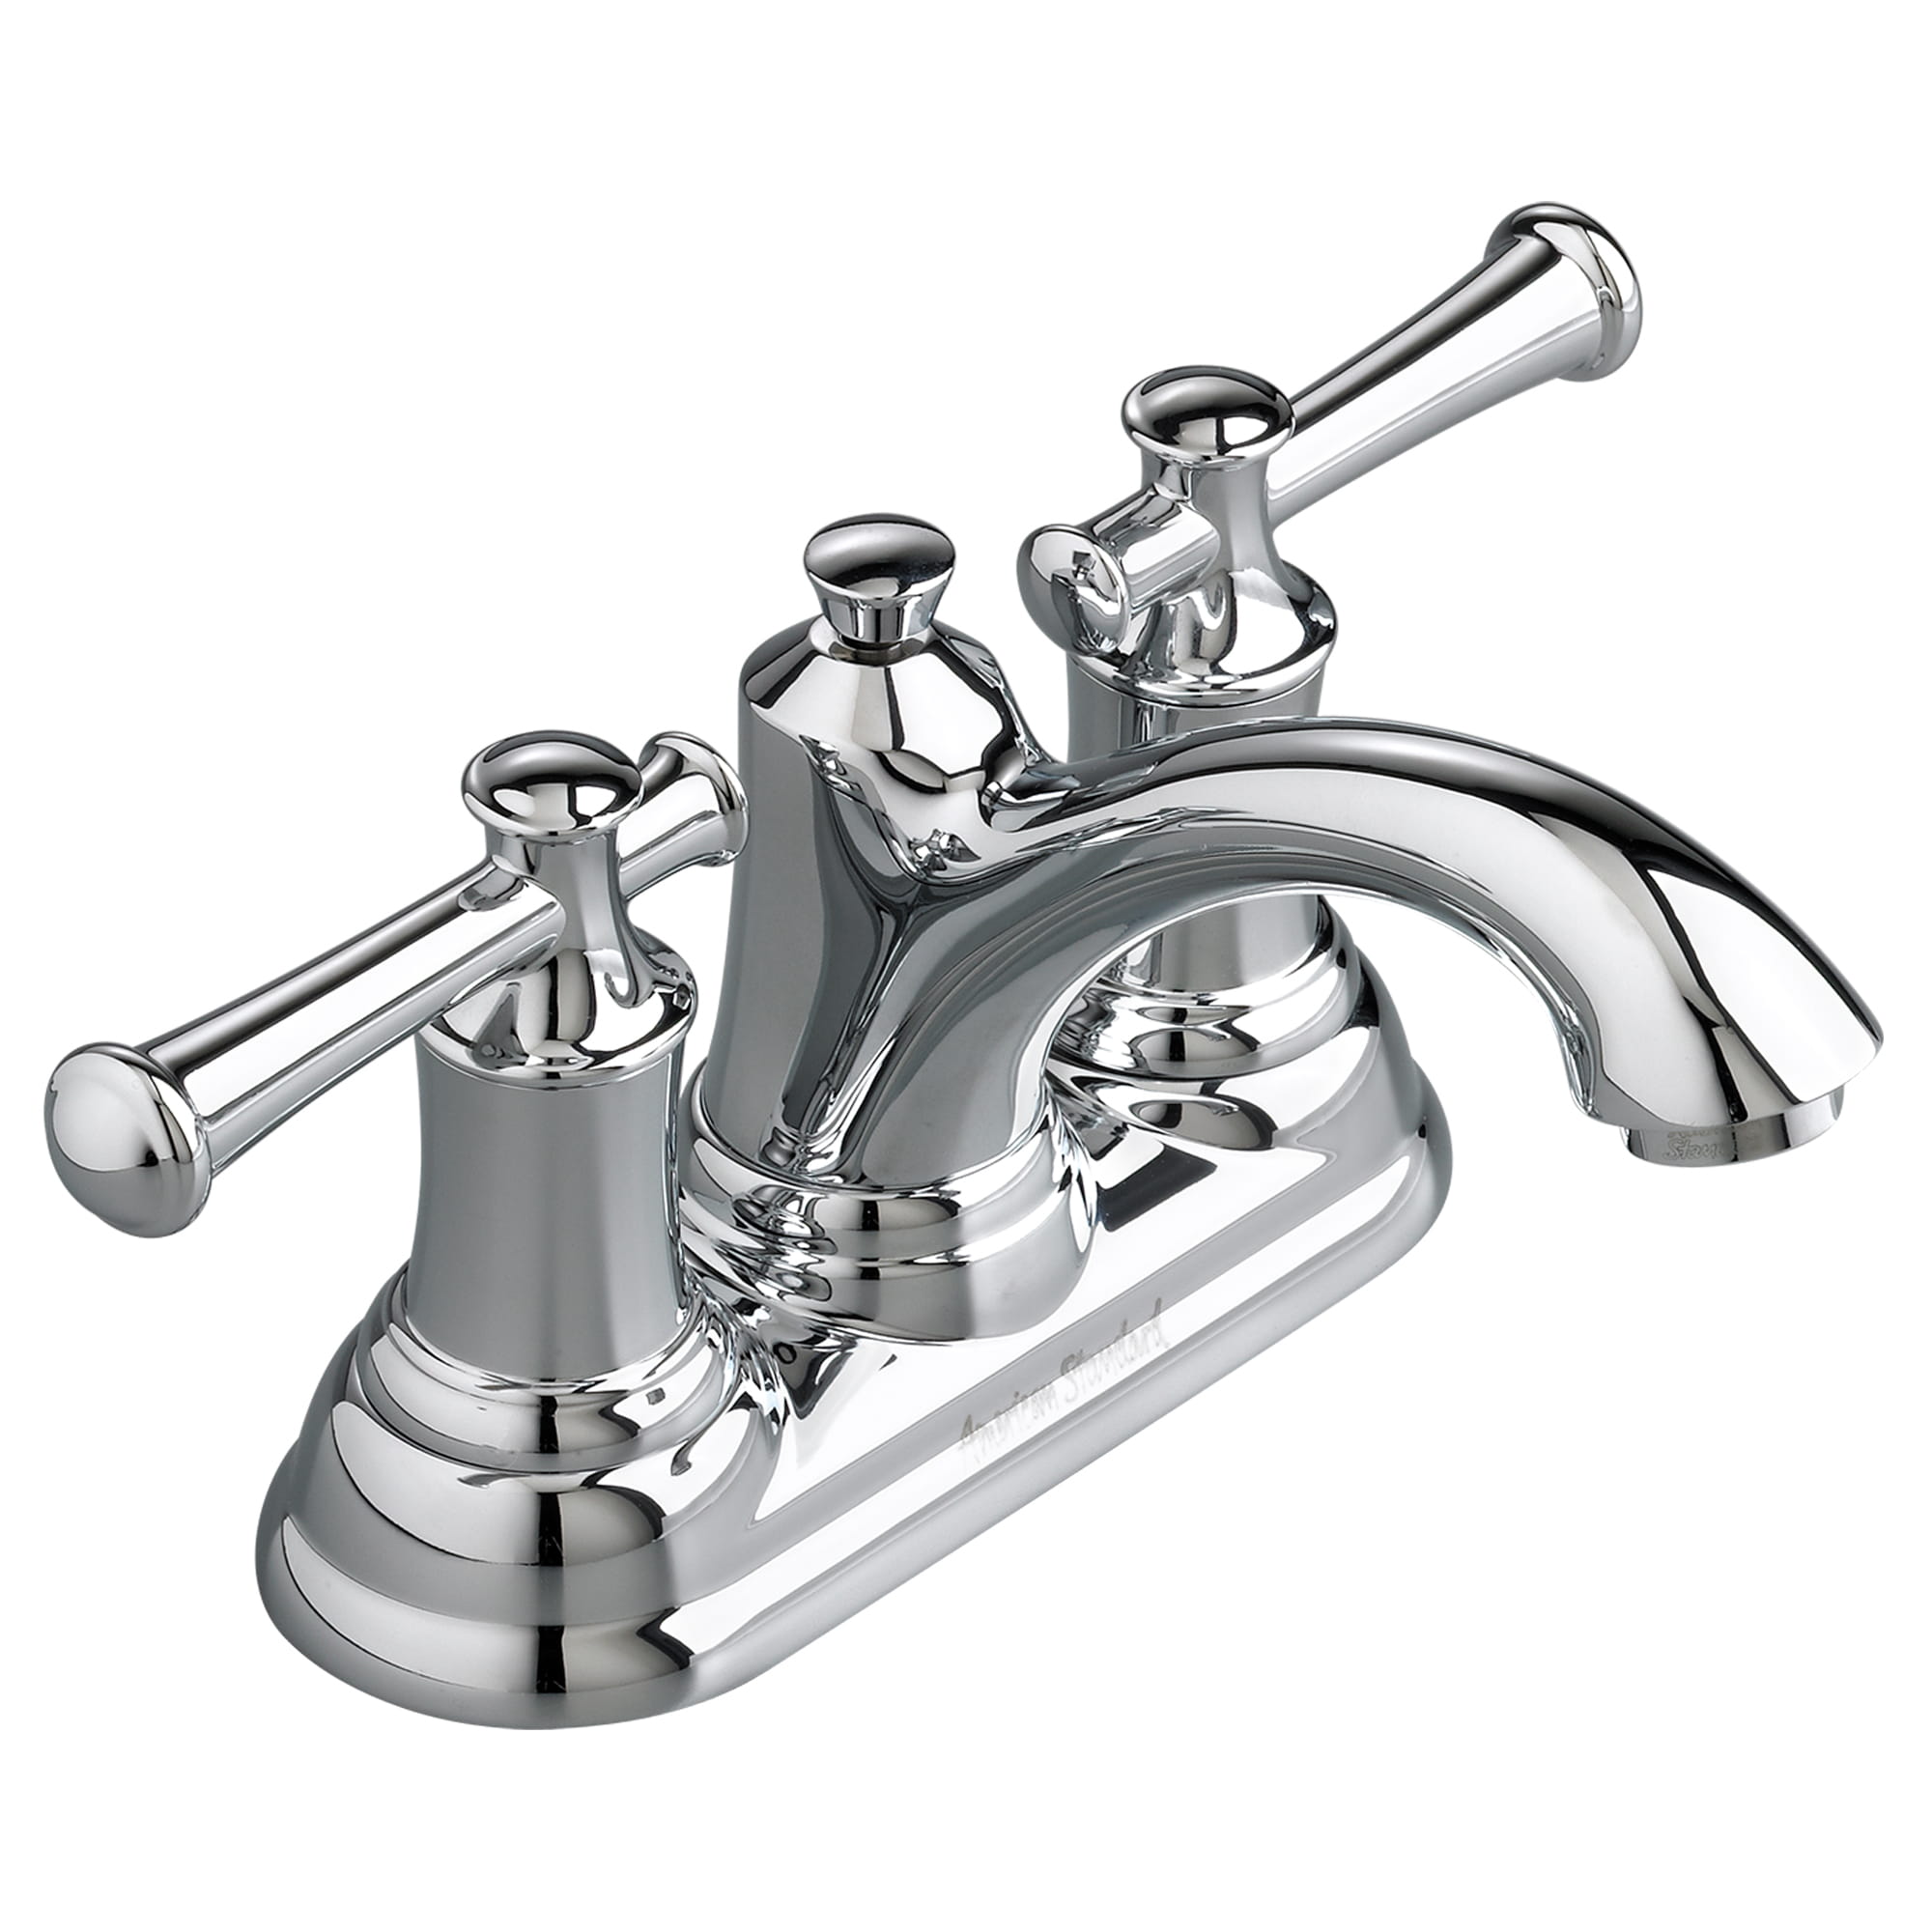 Portsmouth 4 In Centerset 2 Handle Bathroom Faucet 12 GPM with Lever Handles CHROME